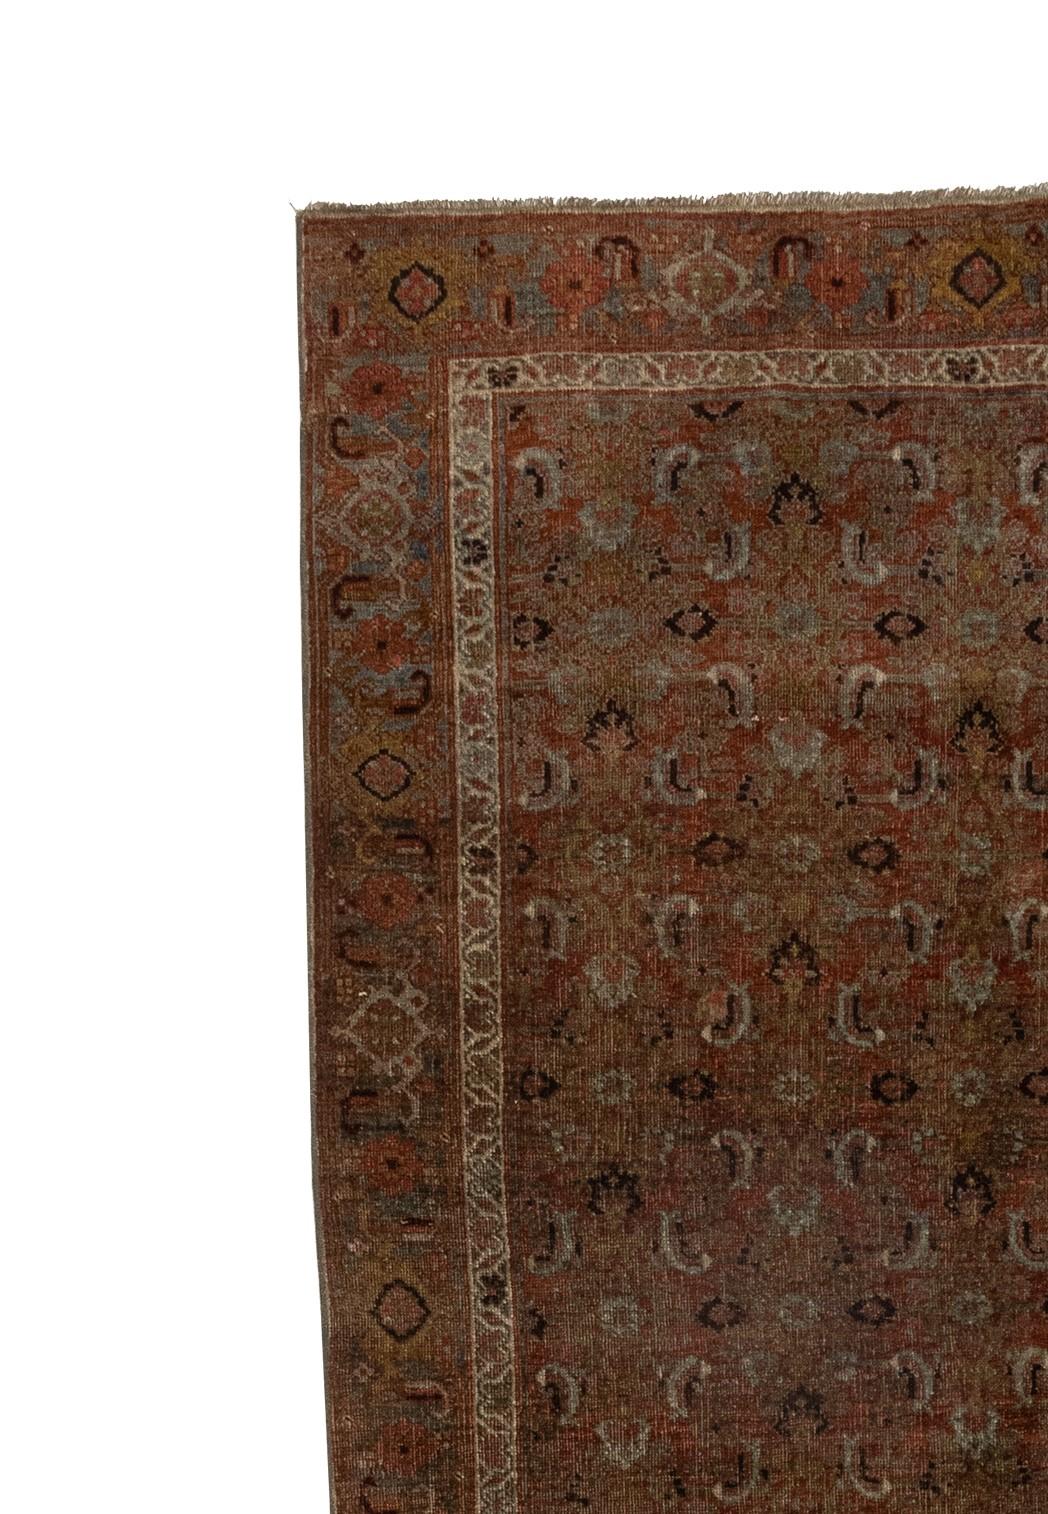 These exceptional pieces were skillfully woven by artisans in the 1990s and have been meticulously maintained ever since. The unparalleled craftsmanship passed down through generations is evident in each rug, making them unique, handmade creations